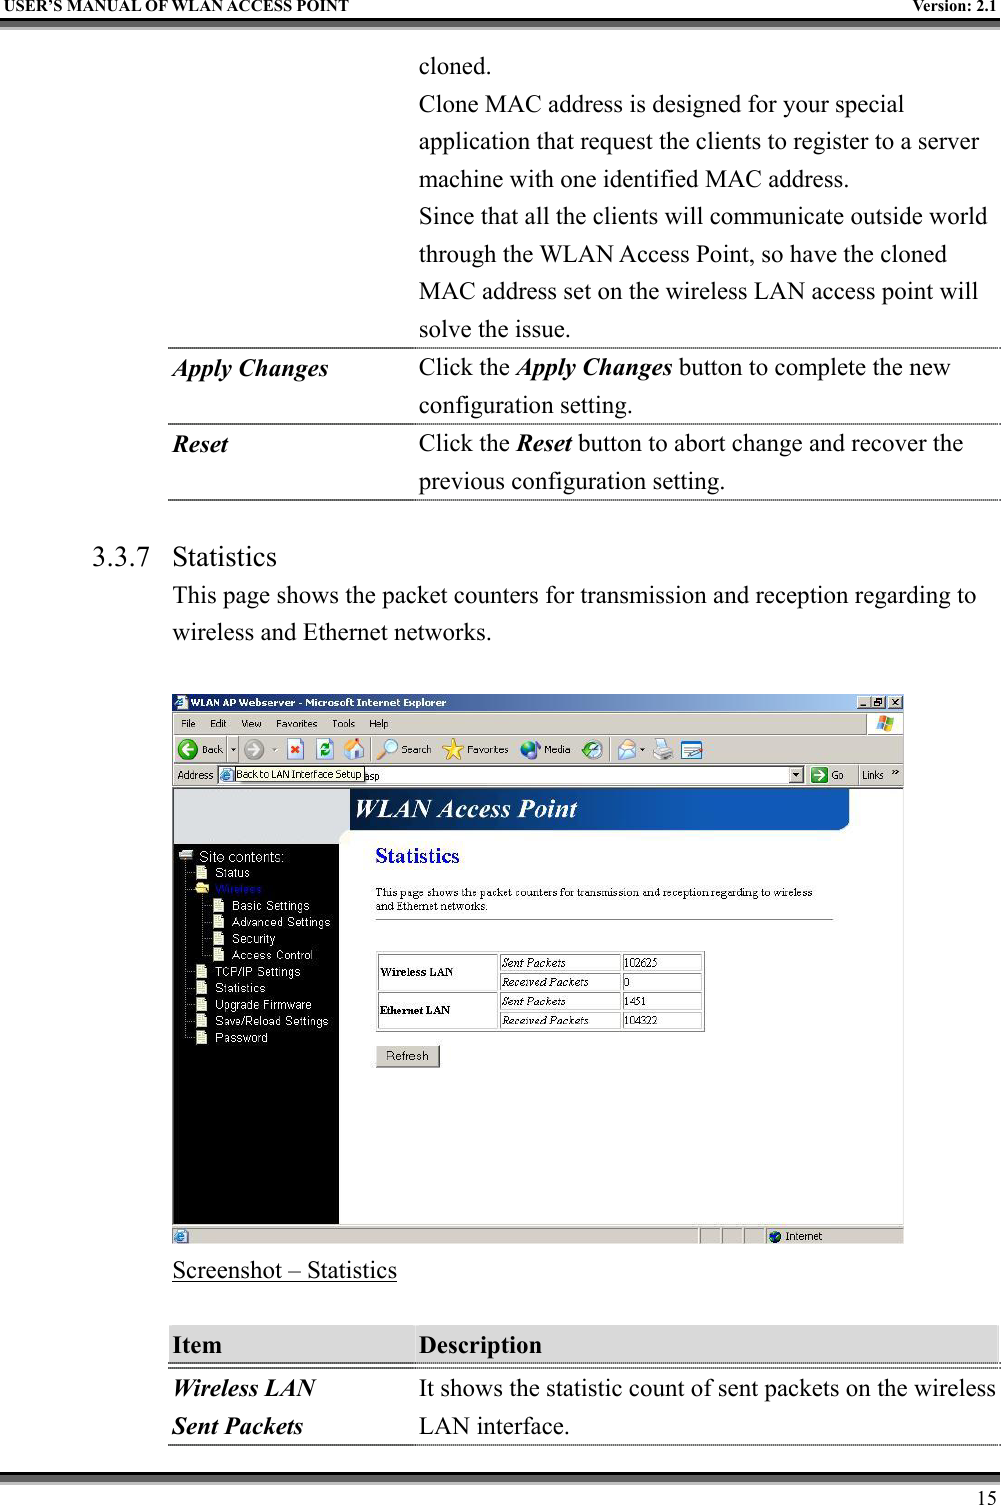   USER’S MANUAL OF WLAN ACCESS POINT    Version: 2.1     15 cloned. Clone MAC address is designed for your special application that request the clients to register to a server machine with one identified MAC address. Since that all the clients will communicate outside world through the WLAN Access Point, so have the cloned MAC address set on the wireless LAN access point will solve the issue. Apply Changes Click the Apply Changes button to complete the new configuration setting. Reset  Click the Reset button to abort change and recover the previous configuration setting.  3.3.7 Statistics This page shows the packet counters for transmission and reception regarding to wireless and Ethernet networks.   Screenshot – Statistics  Item  Description   Wireless LAN Sent Packets It shows the statistic count of sent packets on the wireless LAN interface. 